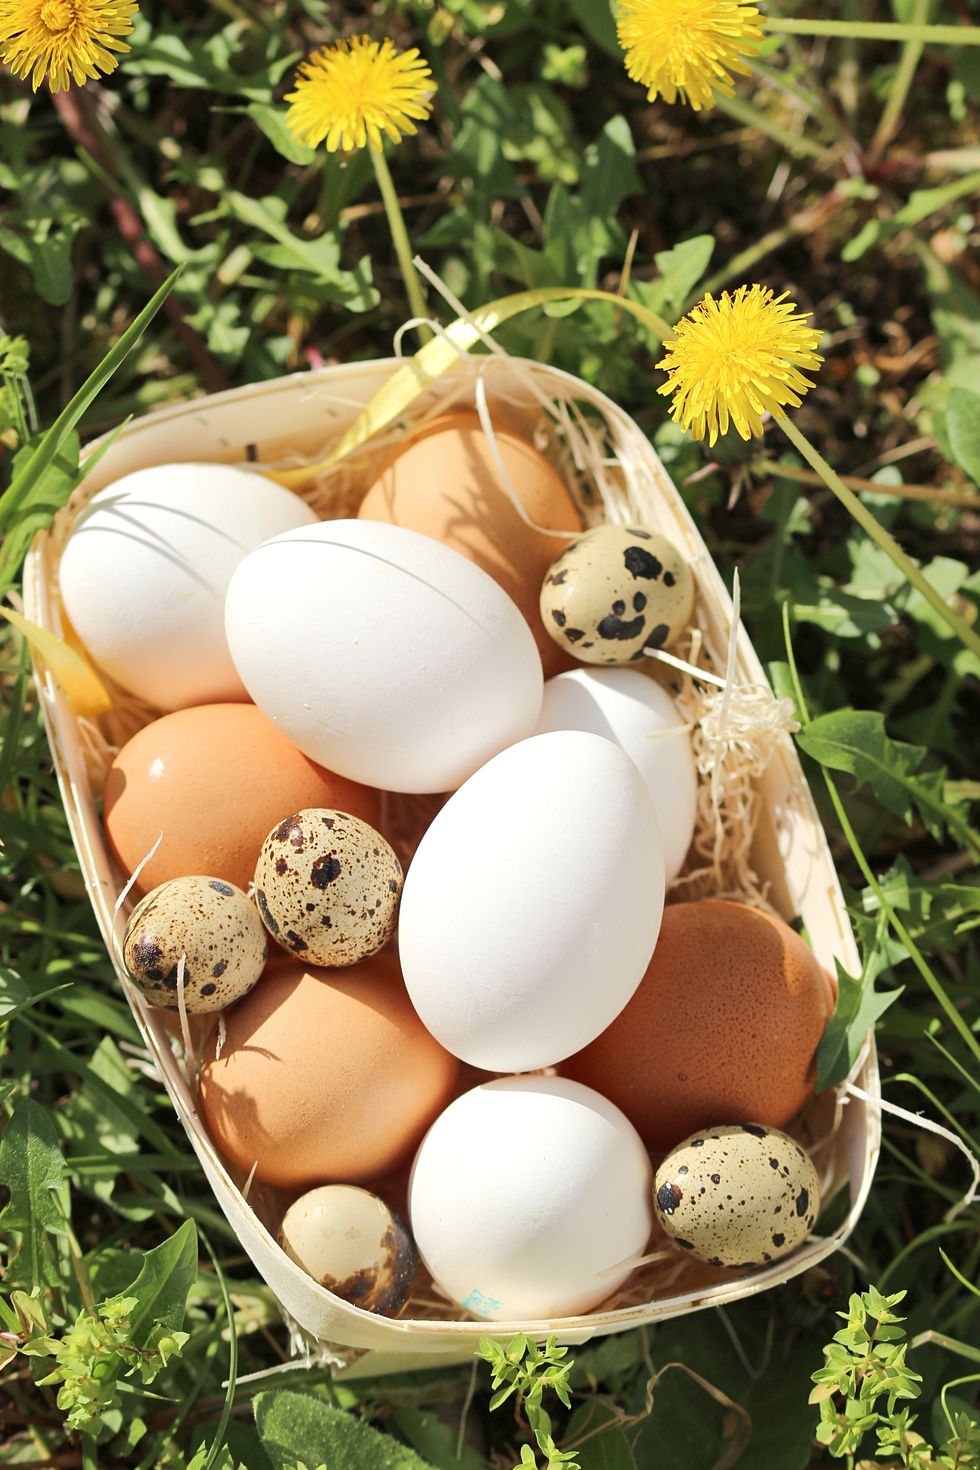 Good Friday Facts Eggs Laid on Easter in Green Grass